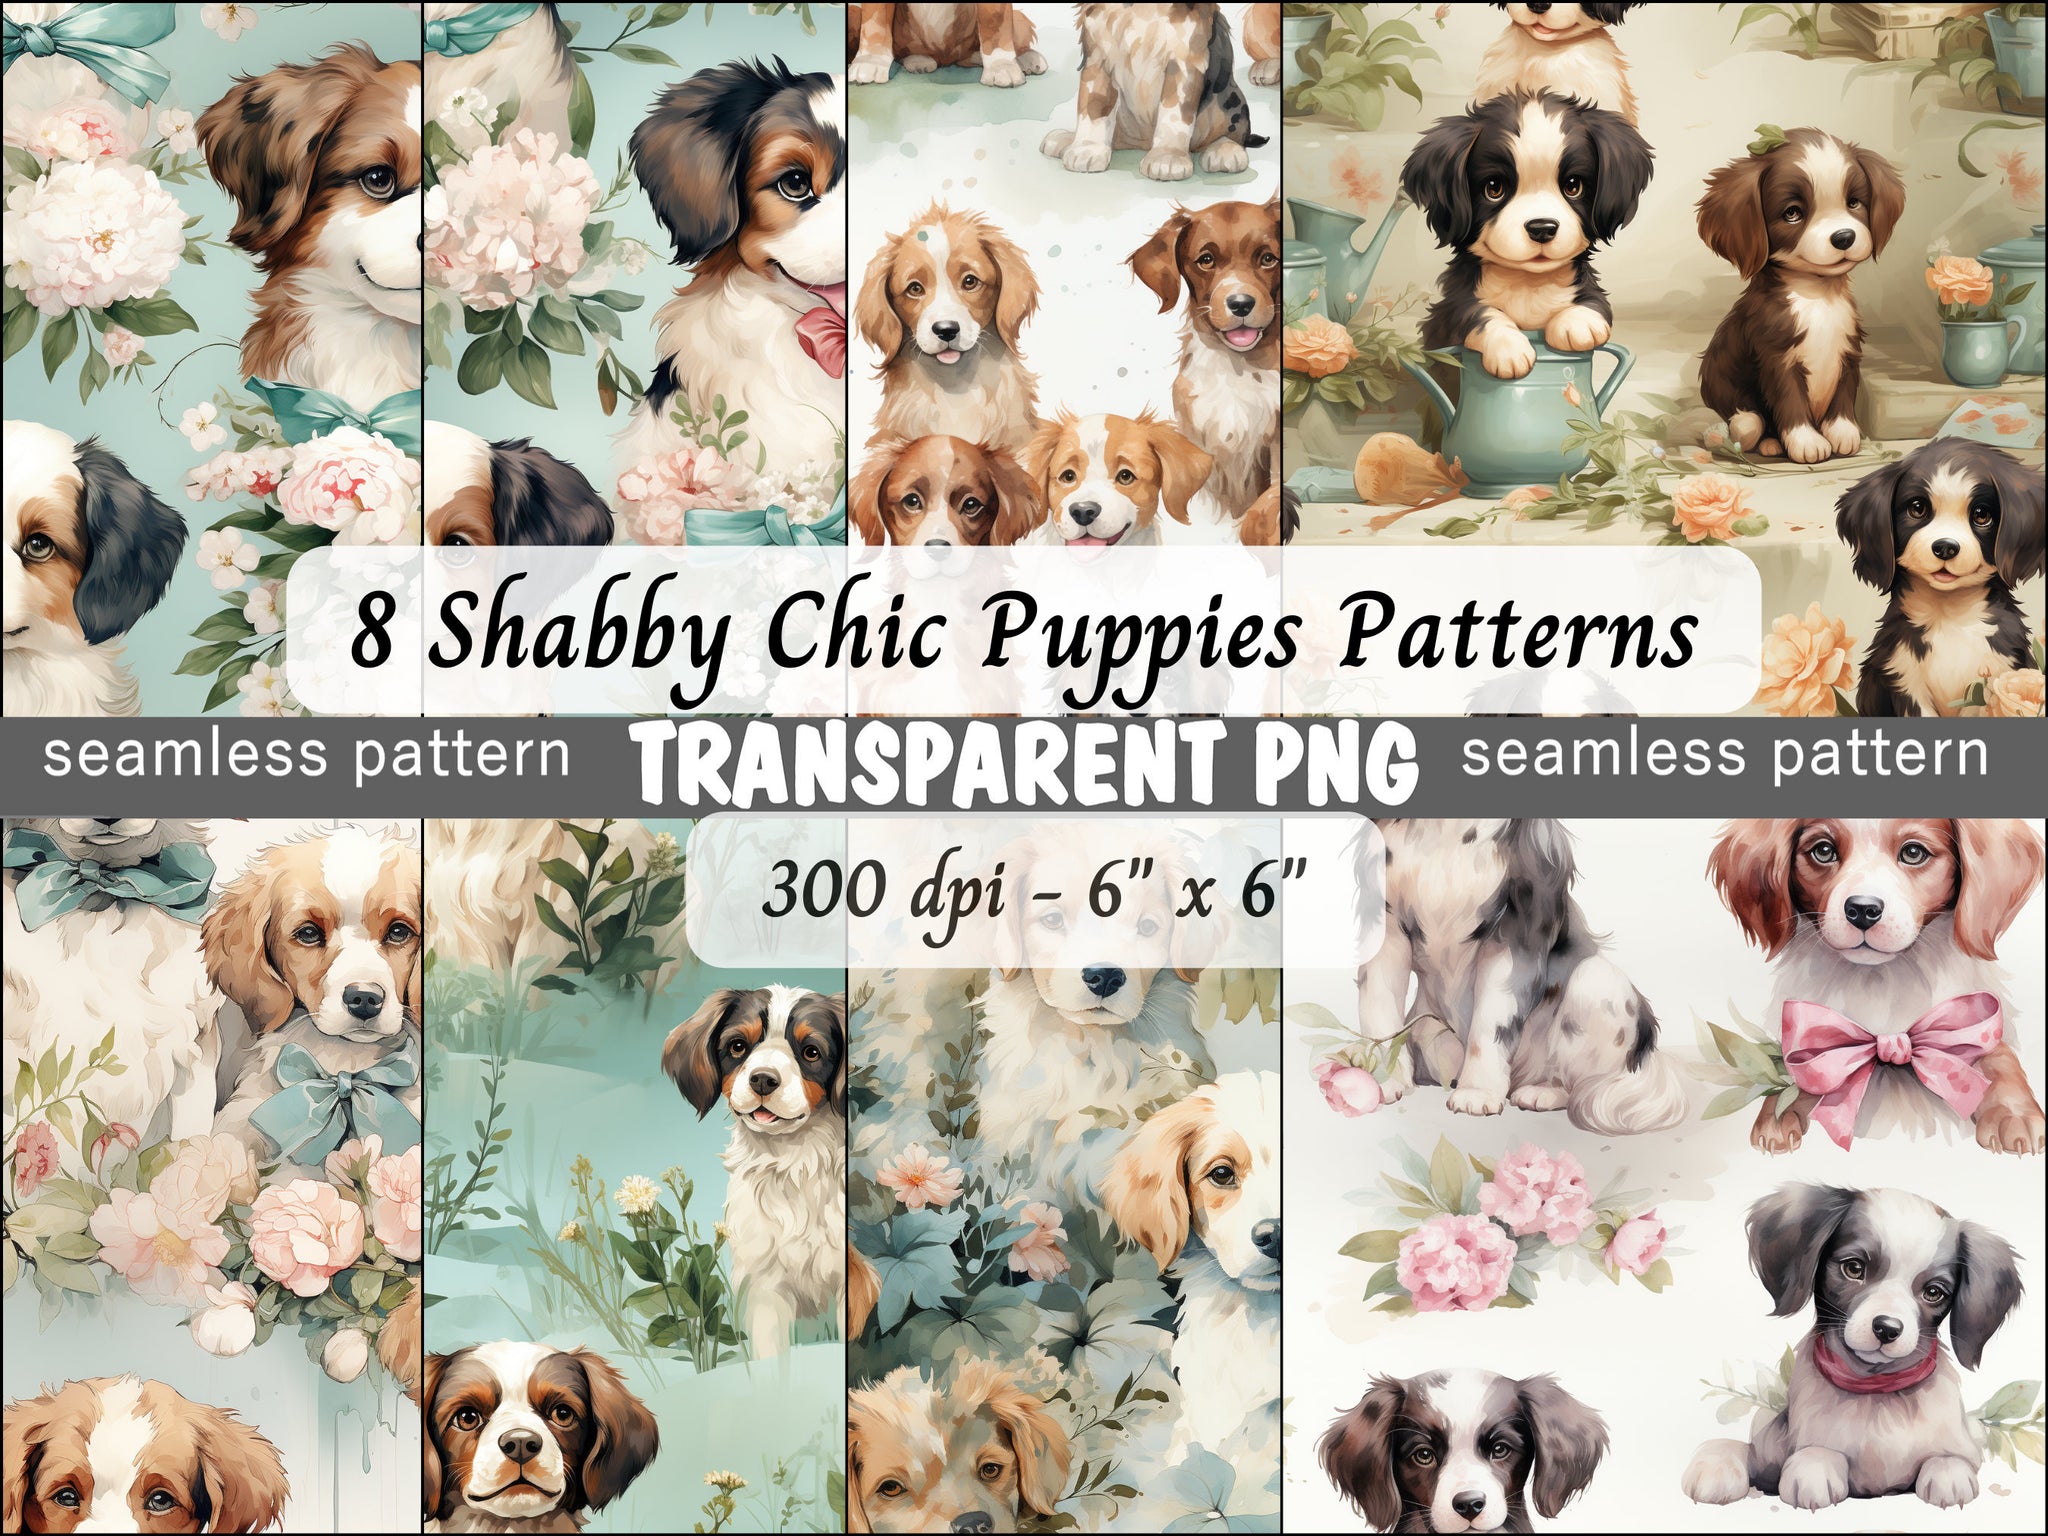 Puppy Seamless Patterns Digital Download PNG - Bundle of 8 - Shabby Chic Vintage Soft Watercolor Puppy Patterns - Commercial & Personal Use